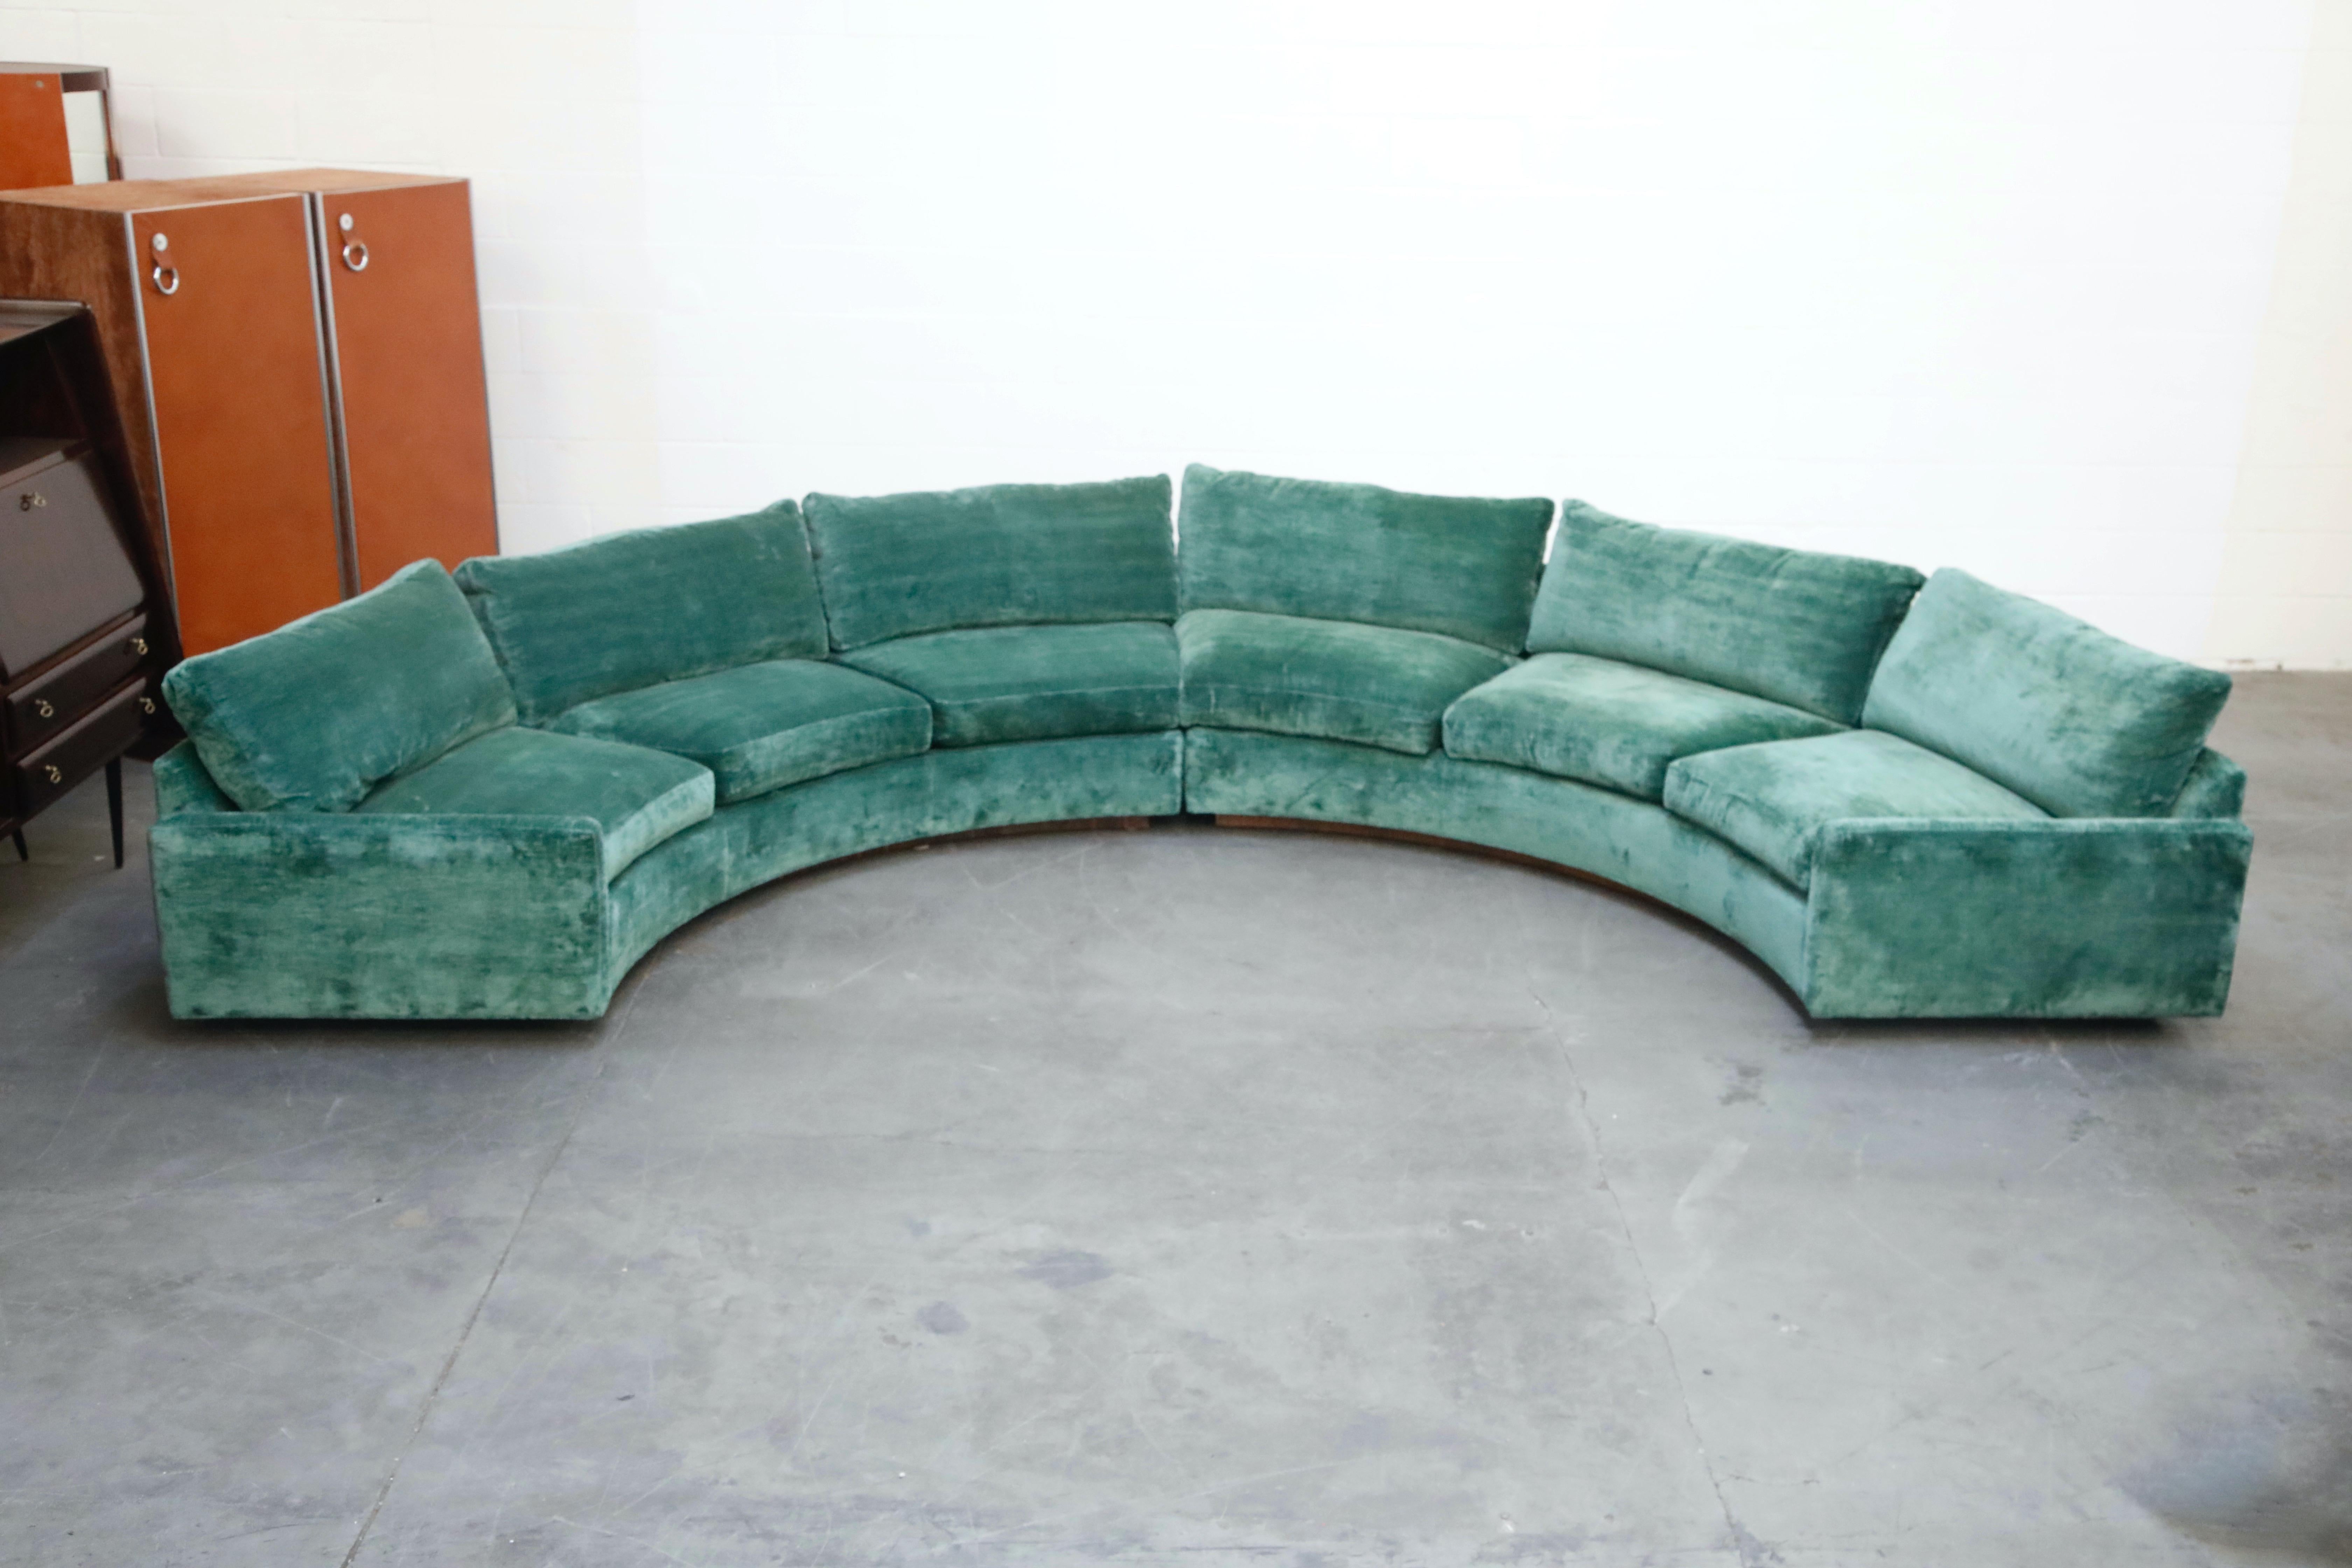 American Milo Baughman Curved Semi-Circle Sofa with Rosewood Base, 1960s, Signed